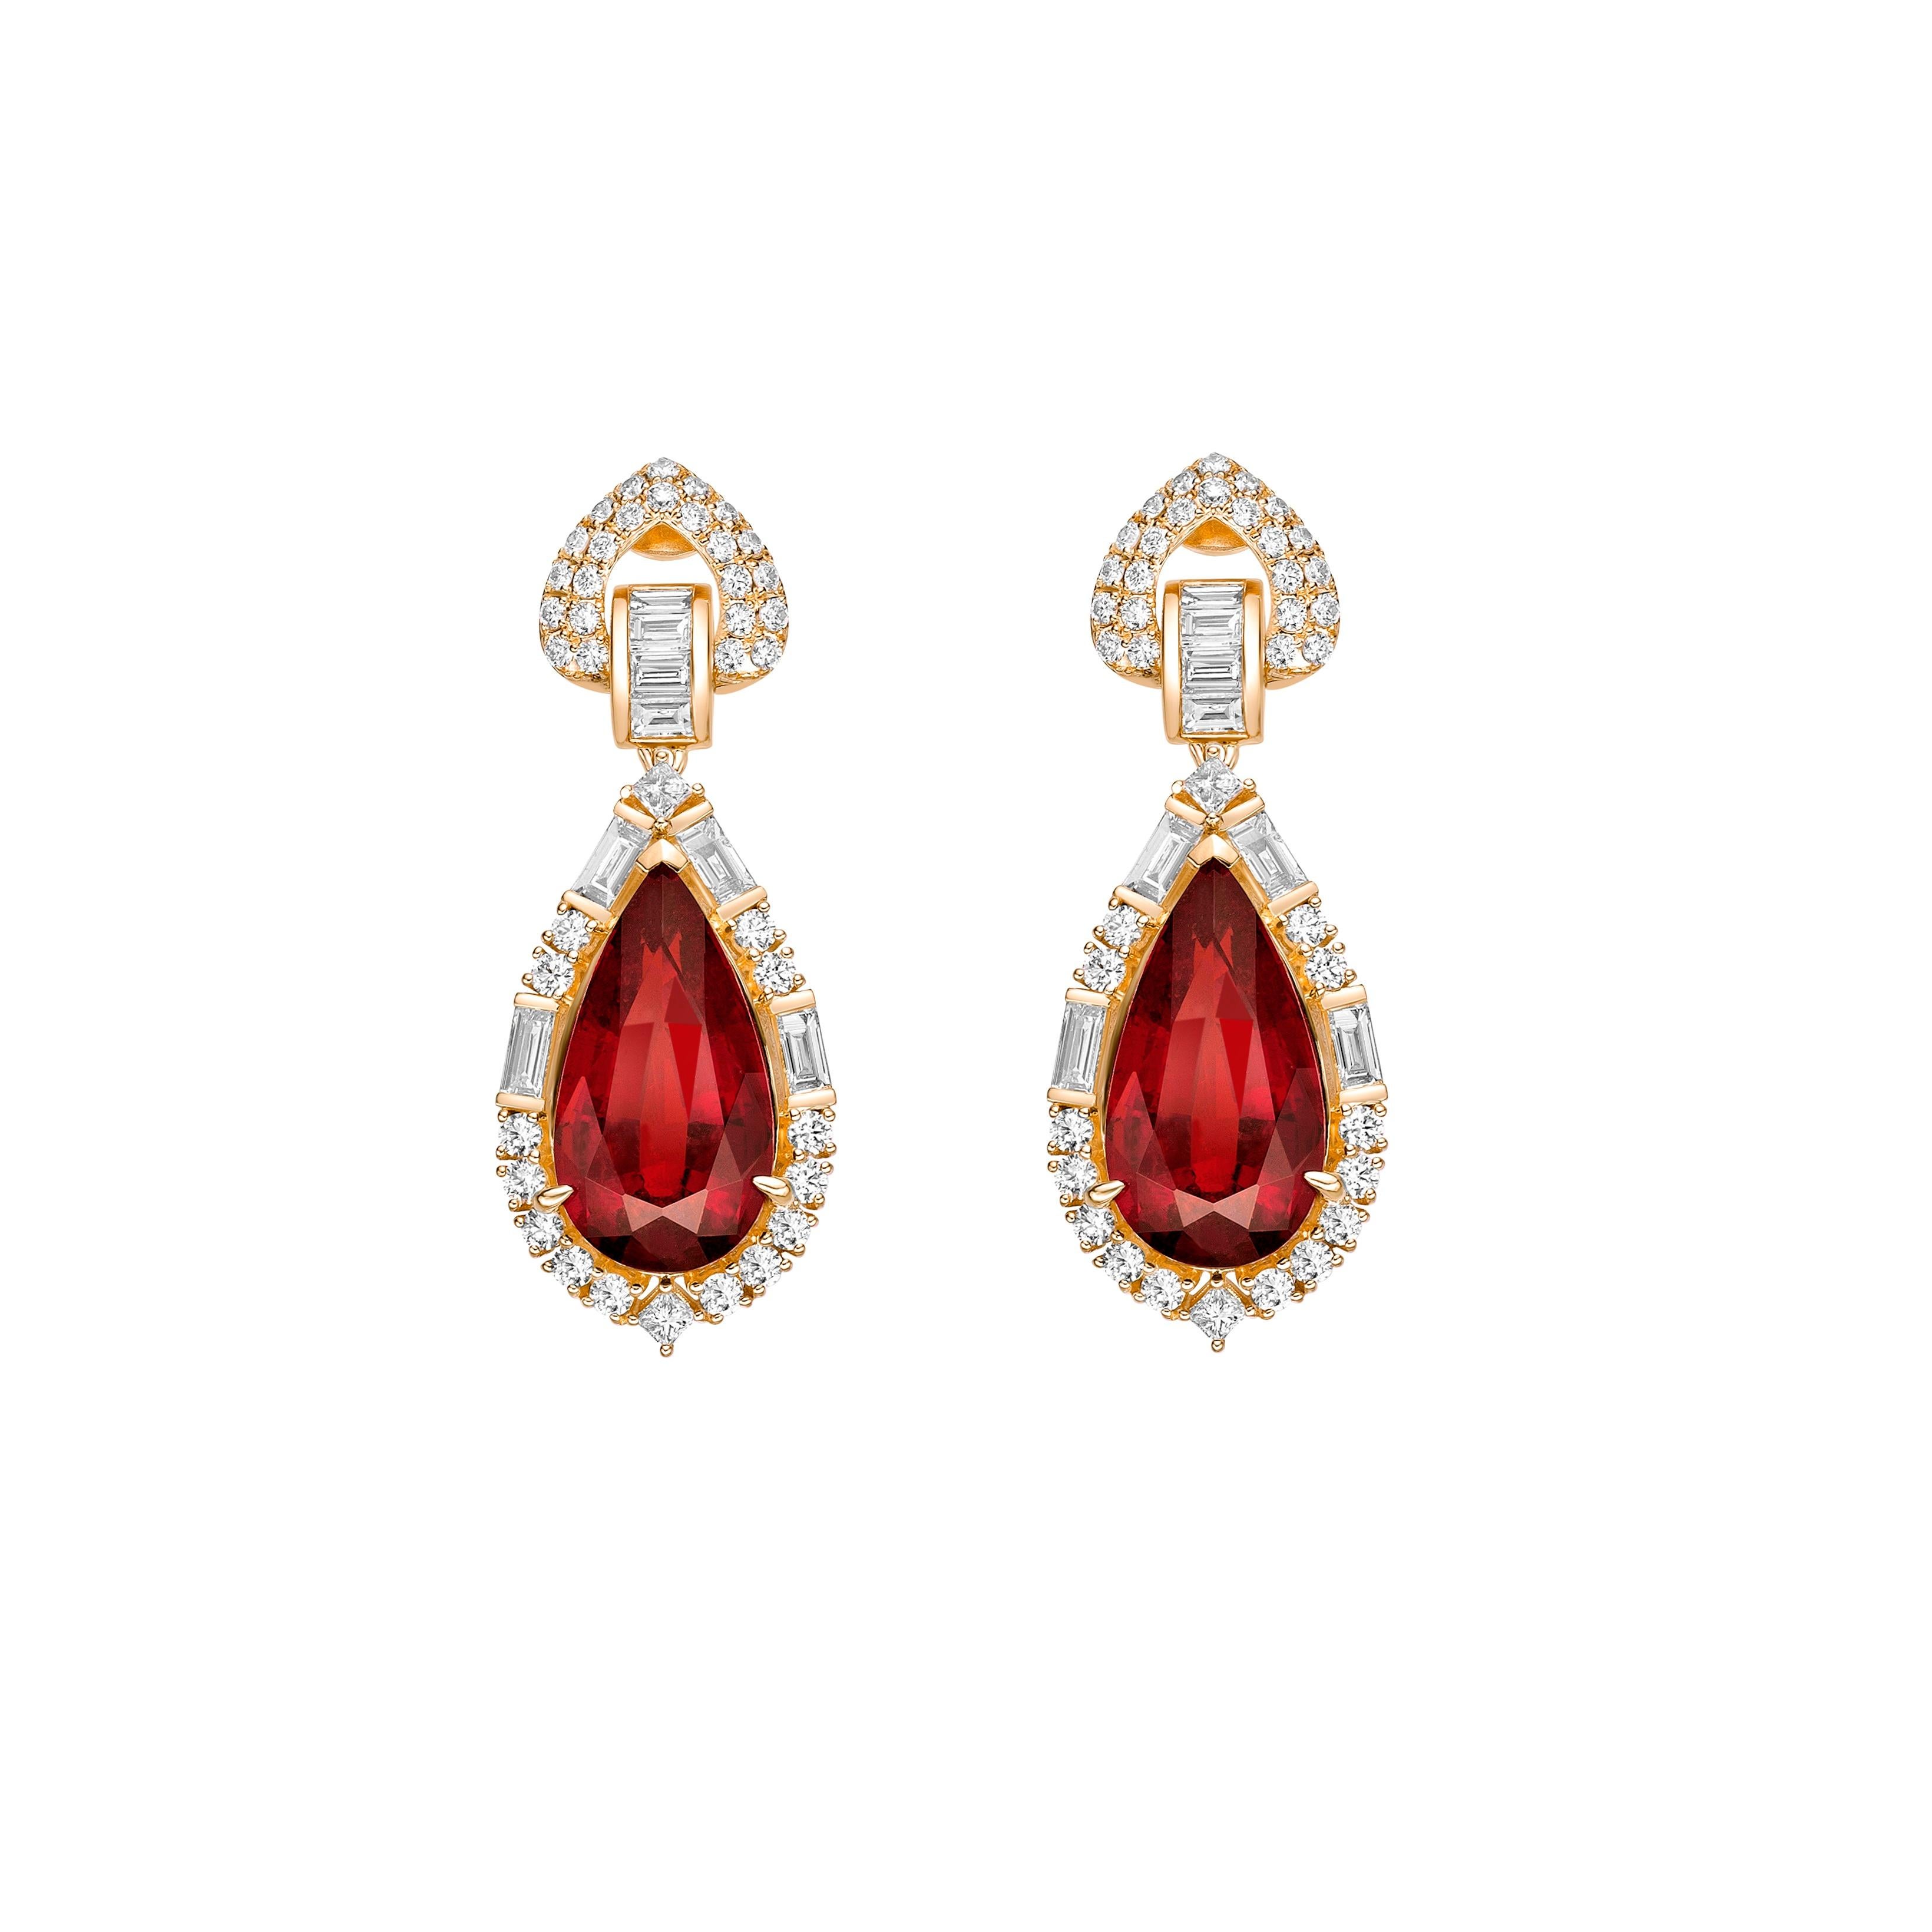 Contemporary 16.480 Carat Rubellite Drop Earrings in 18Karat Yellow Gold with White Diamond. For Sale